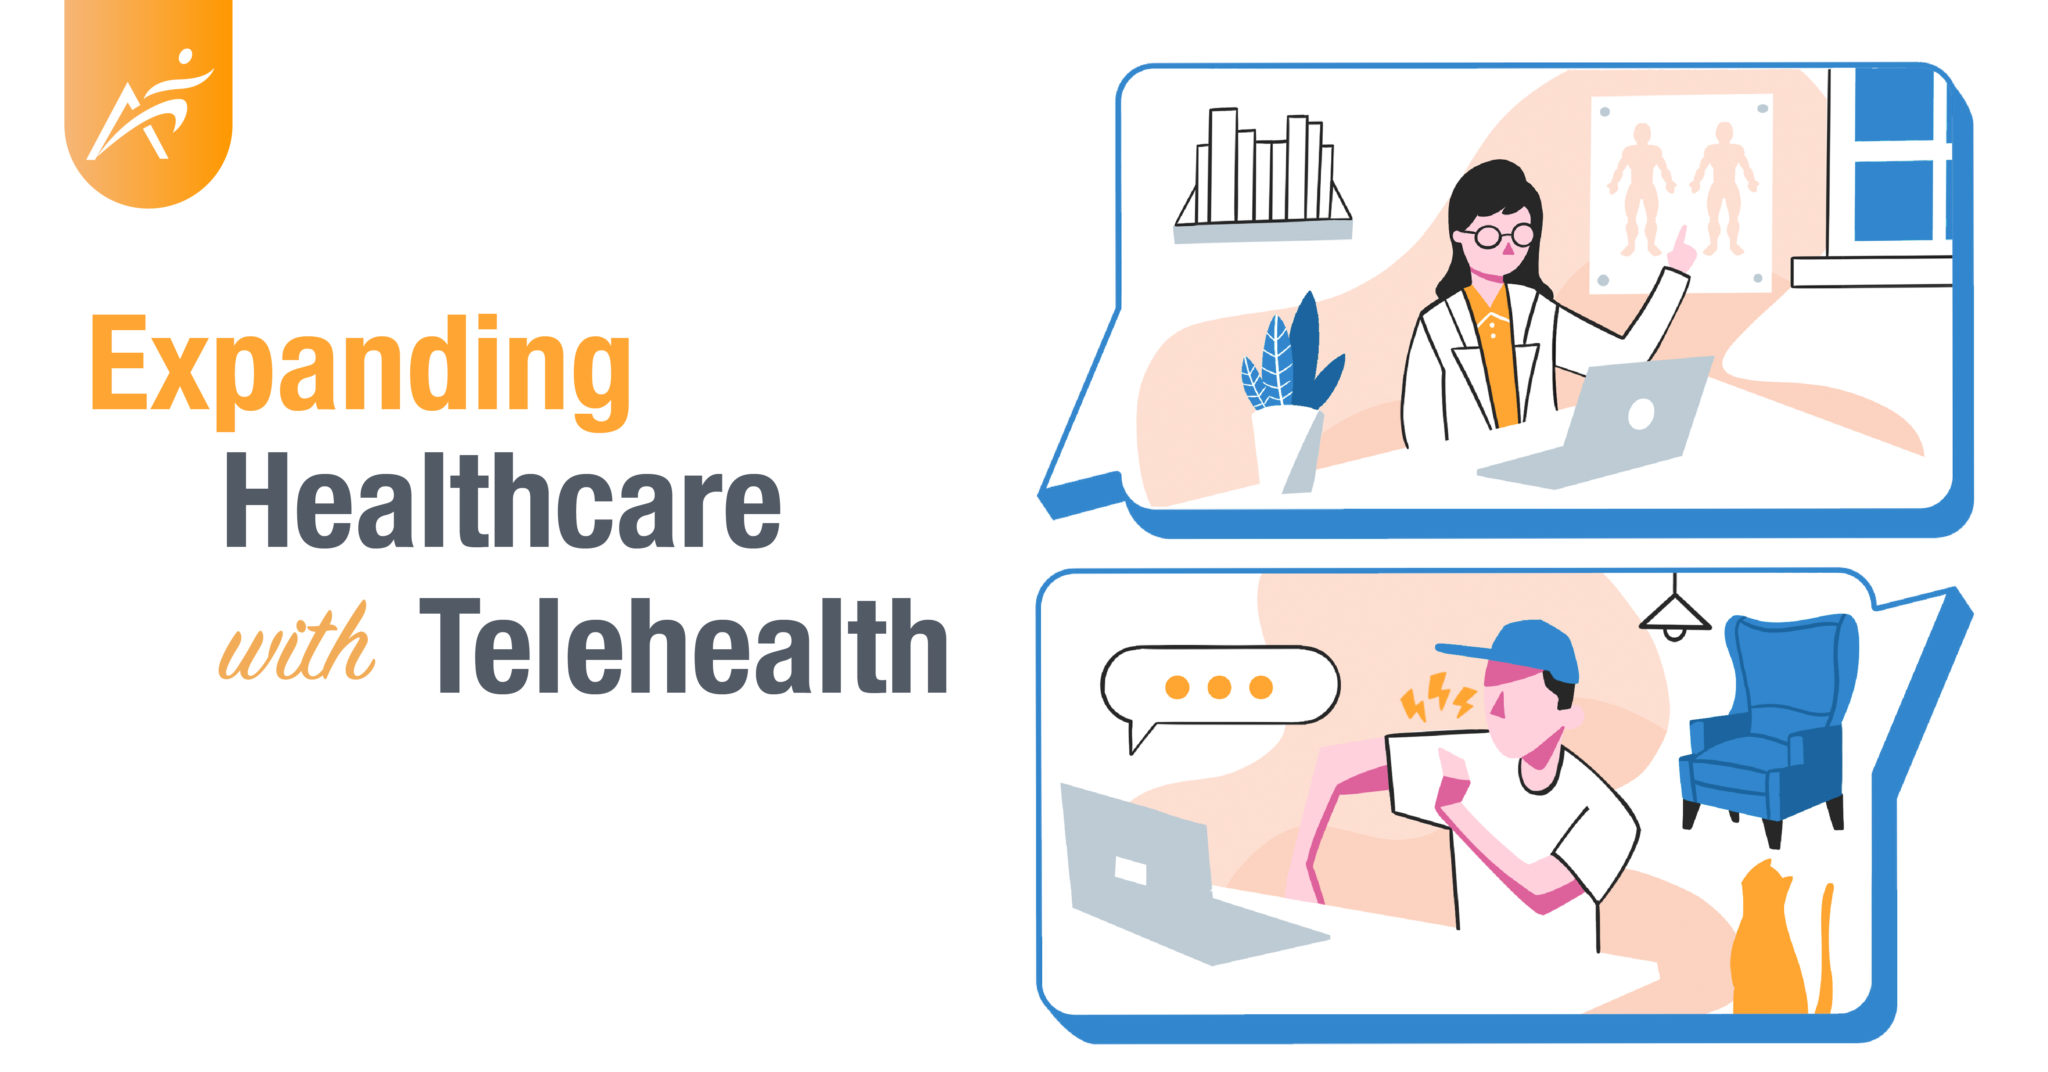 Expanding Healthcare with Telehealth